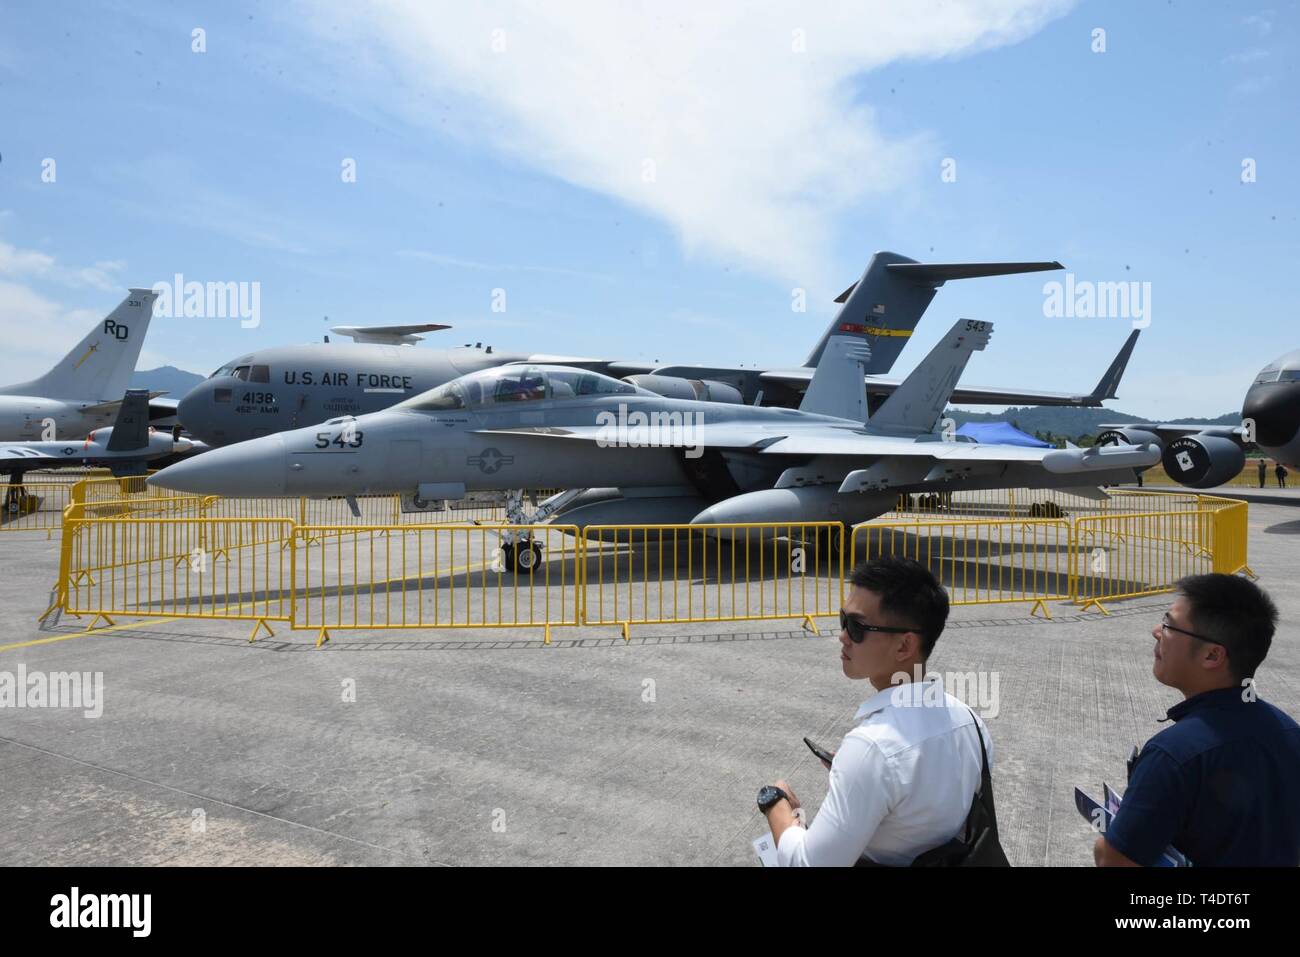 LANGKAWI, Malaysia (March 26, 2019) A U.S. Navy EA-18G Growler from the “Scorpions” of Electronic Attack Squadron (VAQ) 132 sits on display at the 2019 Langkawi International Maritime and Aerospace (LIMA) Exhibition. Approximately 1,400 U.S. Navy and Air Force personnel participated in LIMA19. U.S. Navy aircraft on display included a P-8A Poseidon, EA-18G Growler, and MH-60R Seahawk. Stock Photo